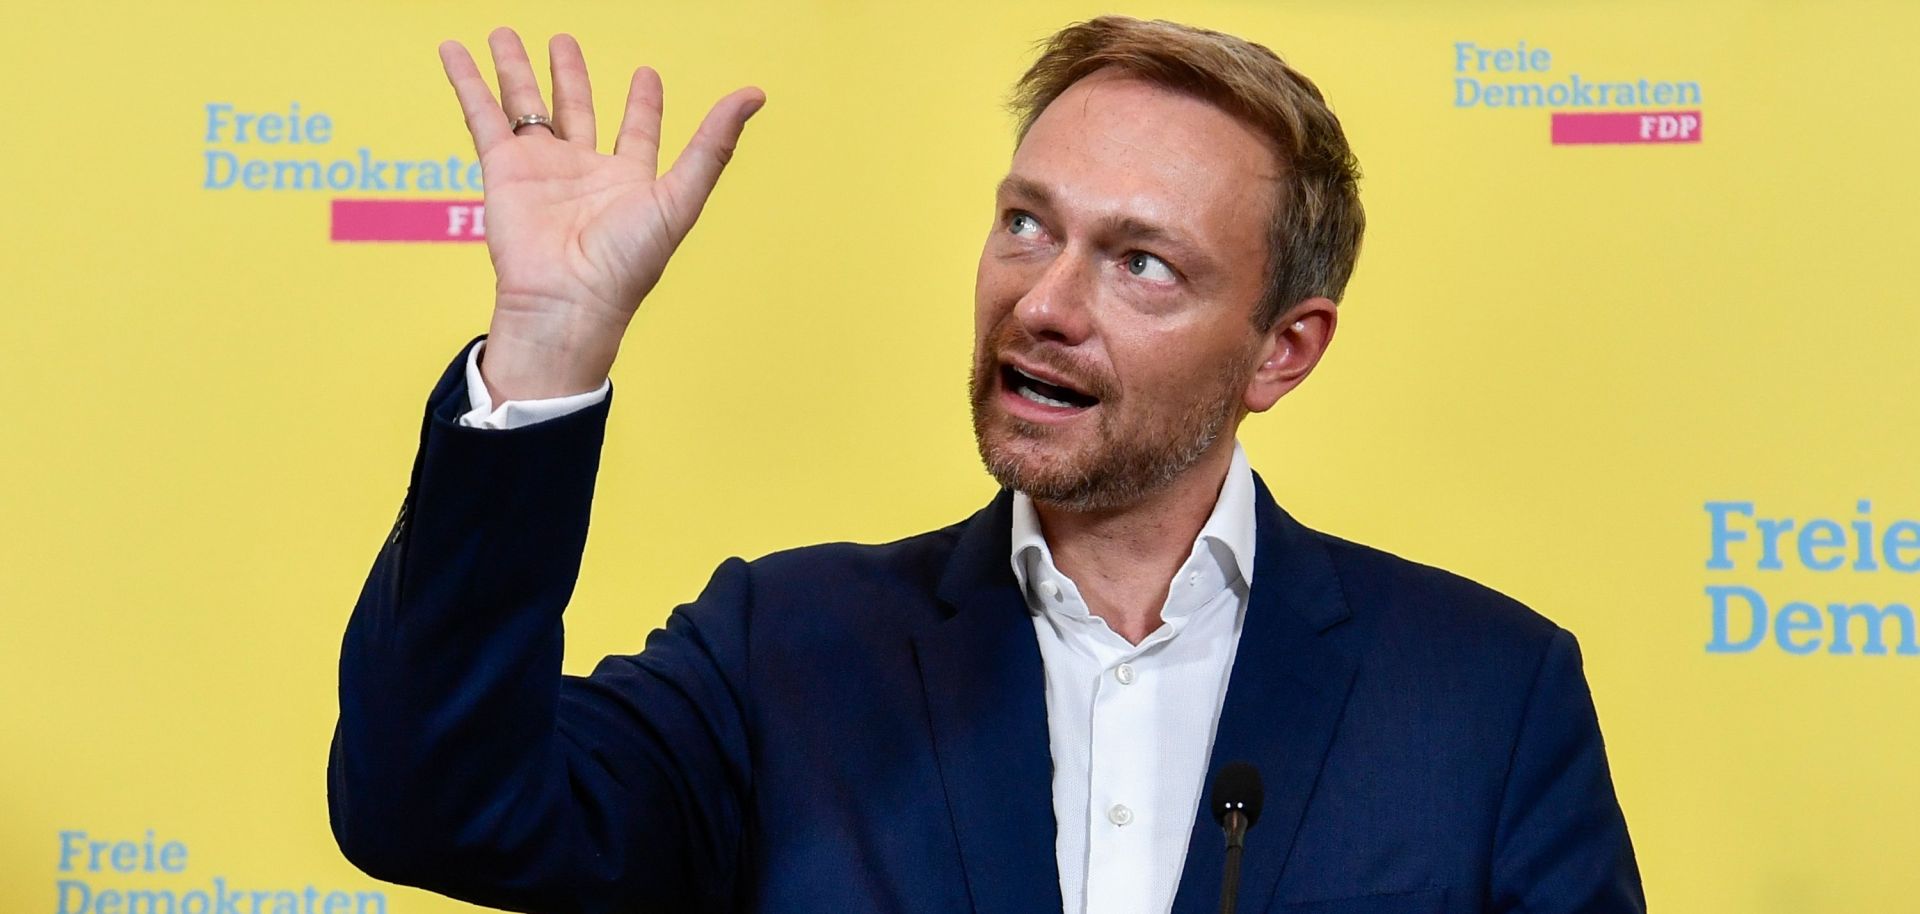 Free Democratic Party leader Christian Lindner backs a free-market economy in which the federal government doesn't get too involved.